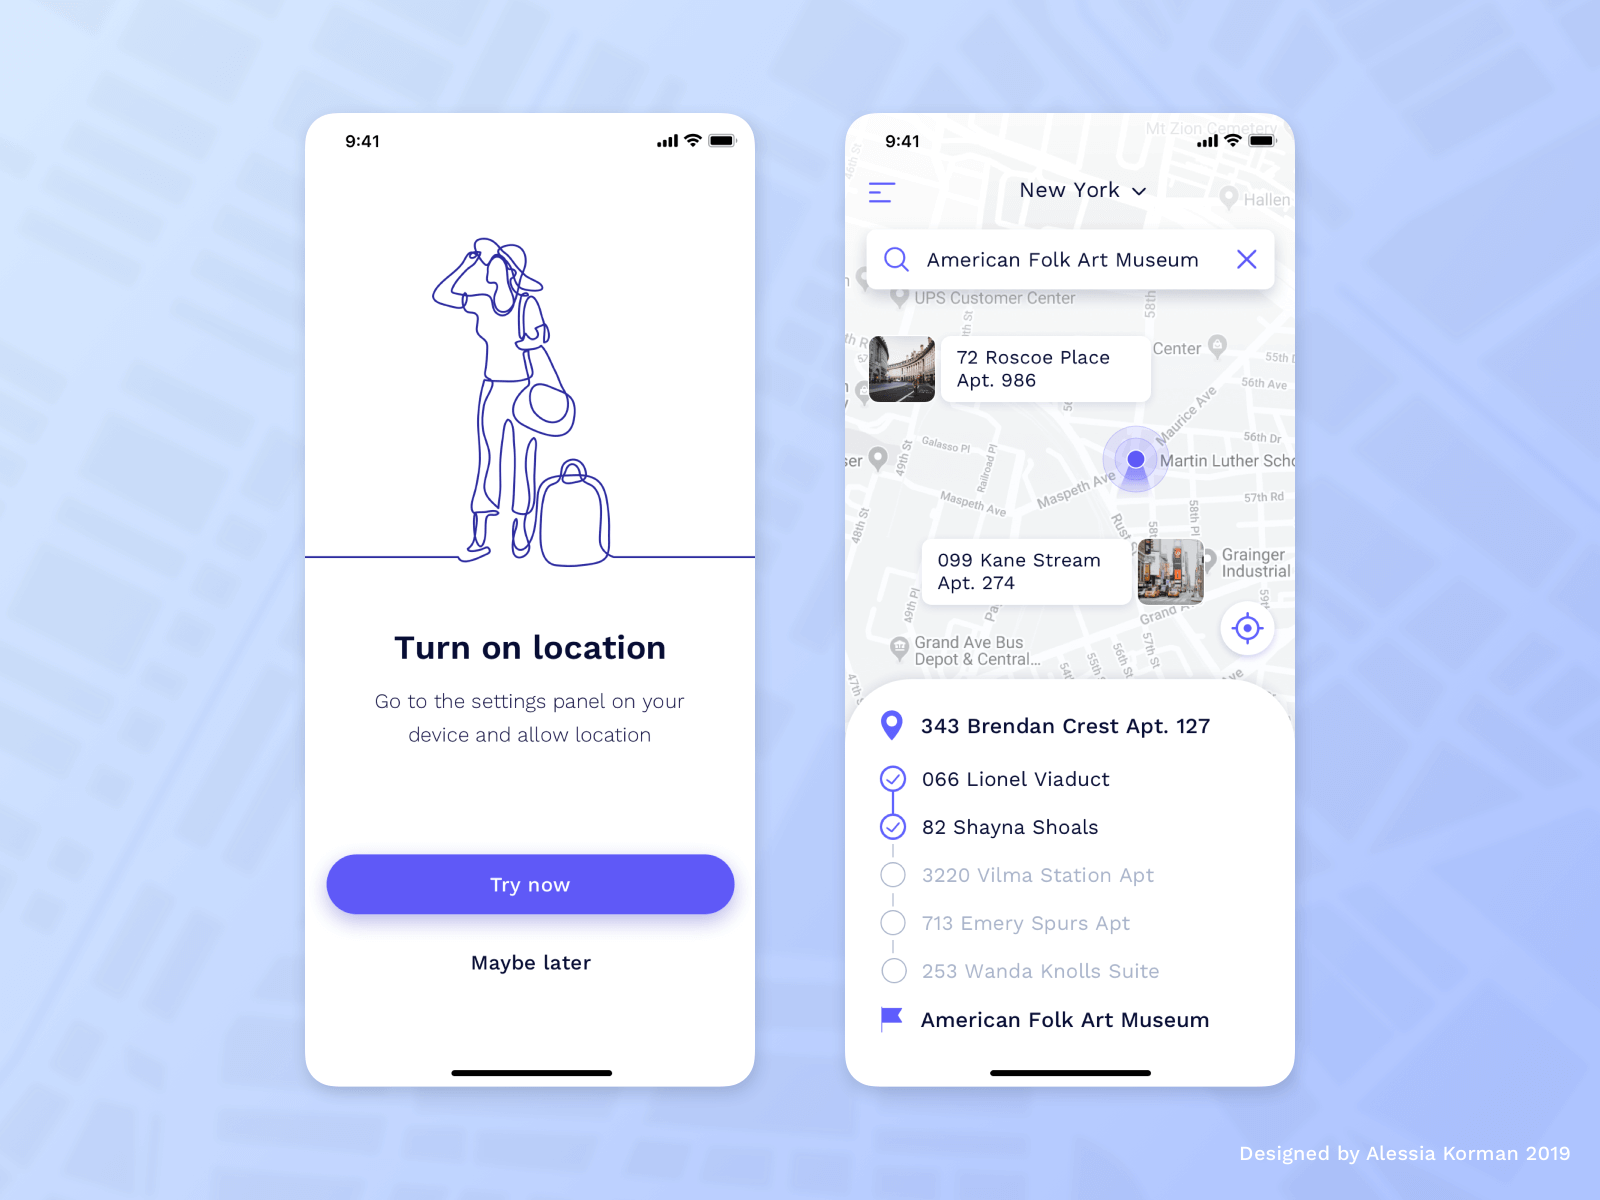 Example of an app integrating location based UX design principles